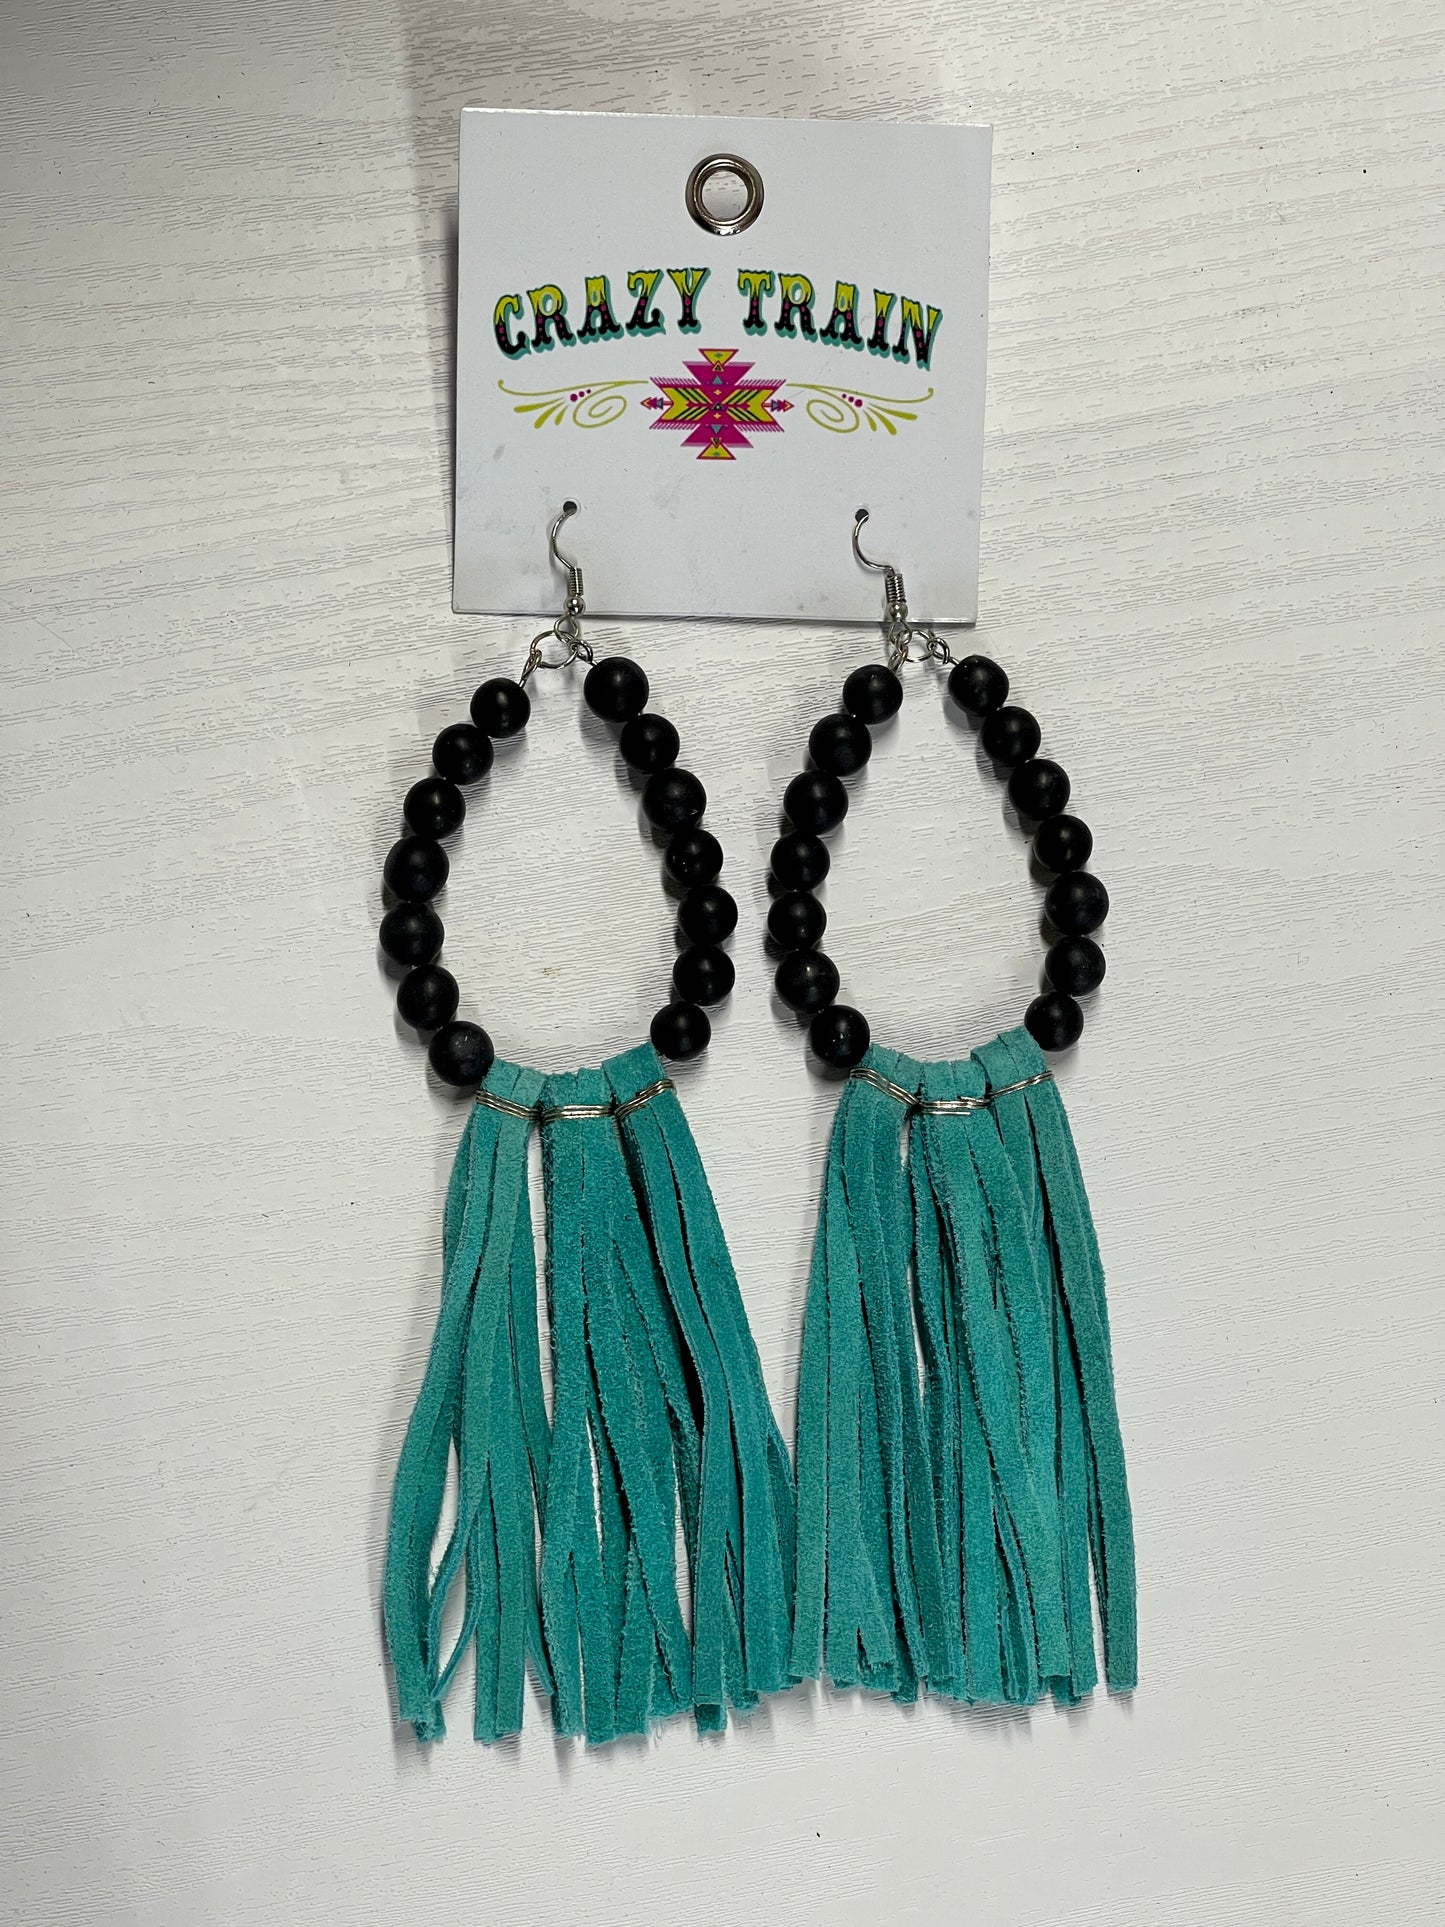 Teardrop shaped earrings with black beads lining the teardrop with teal, leather tassels along the bottom.